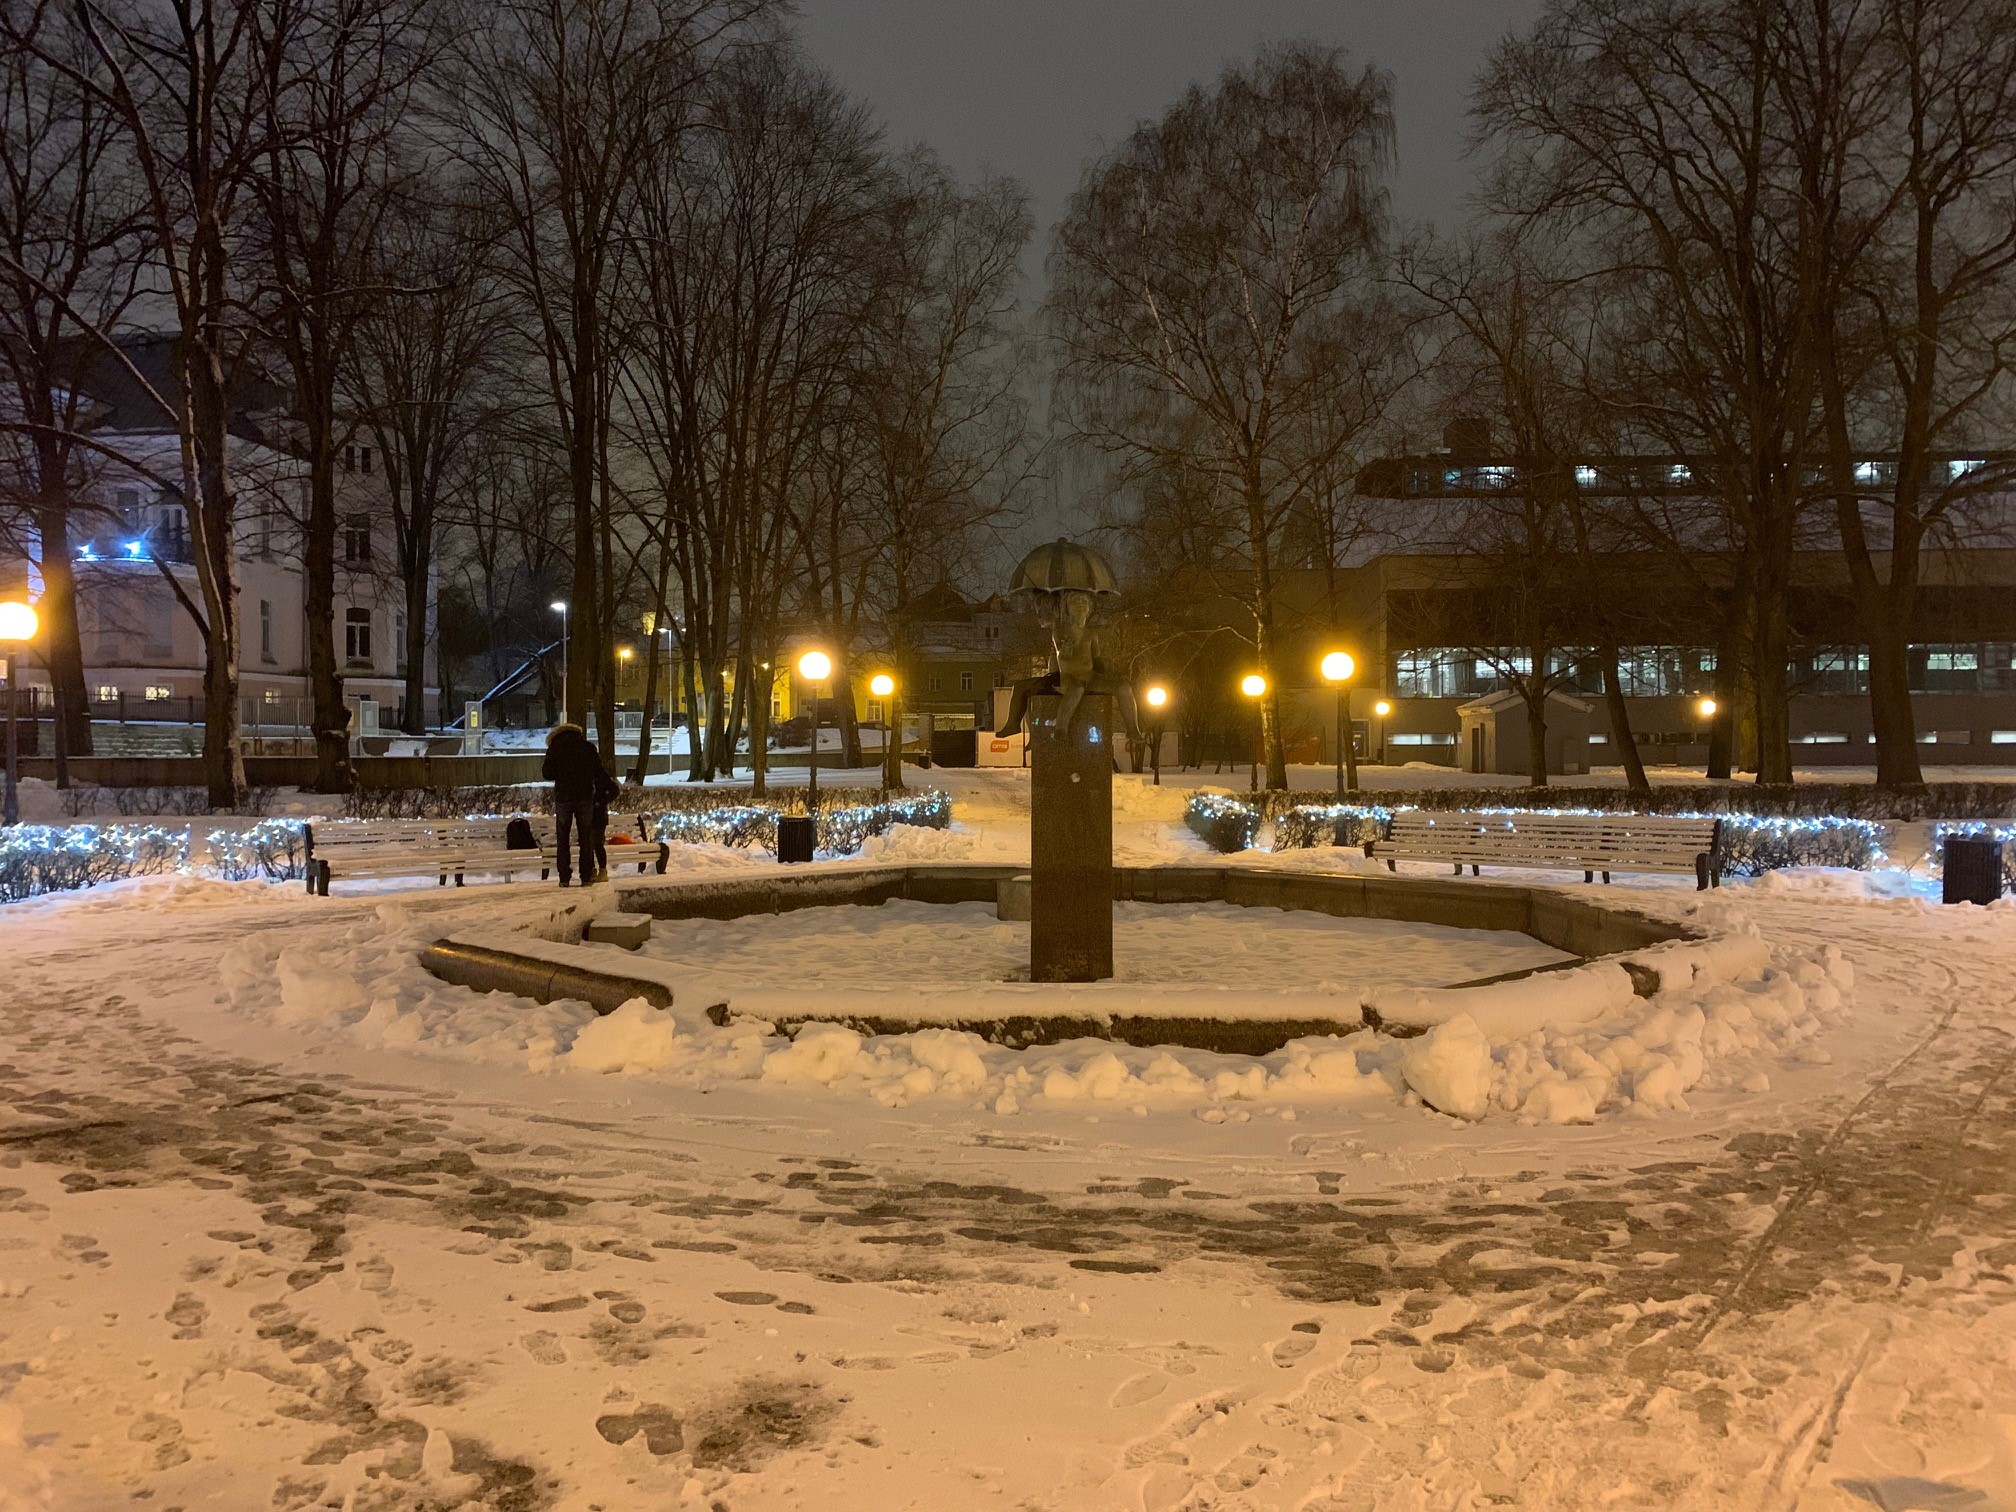 The Canute Garden in Tallinn during the winter